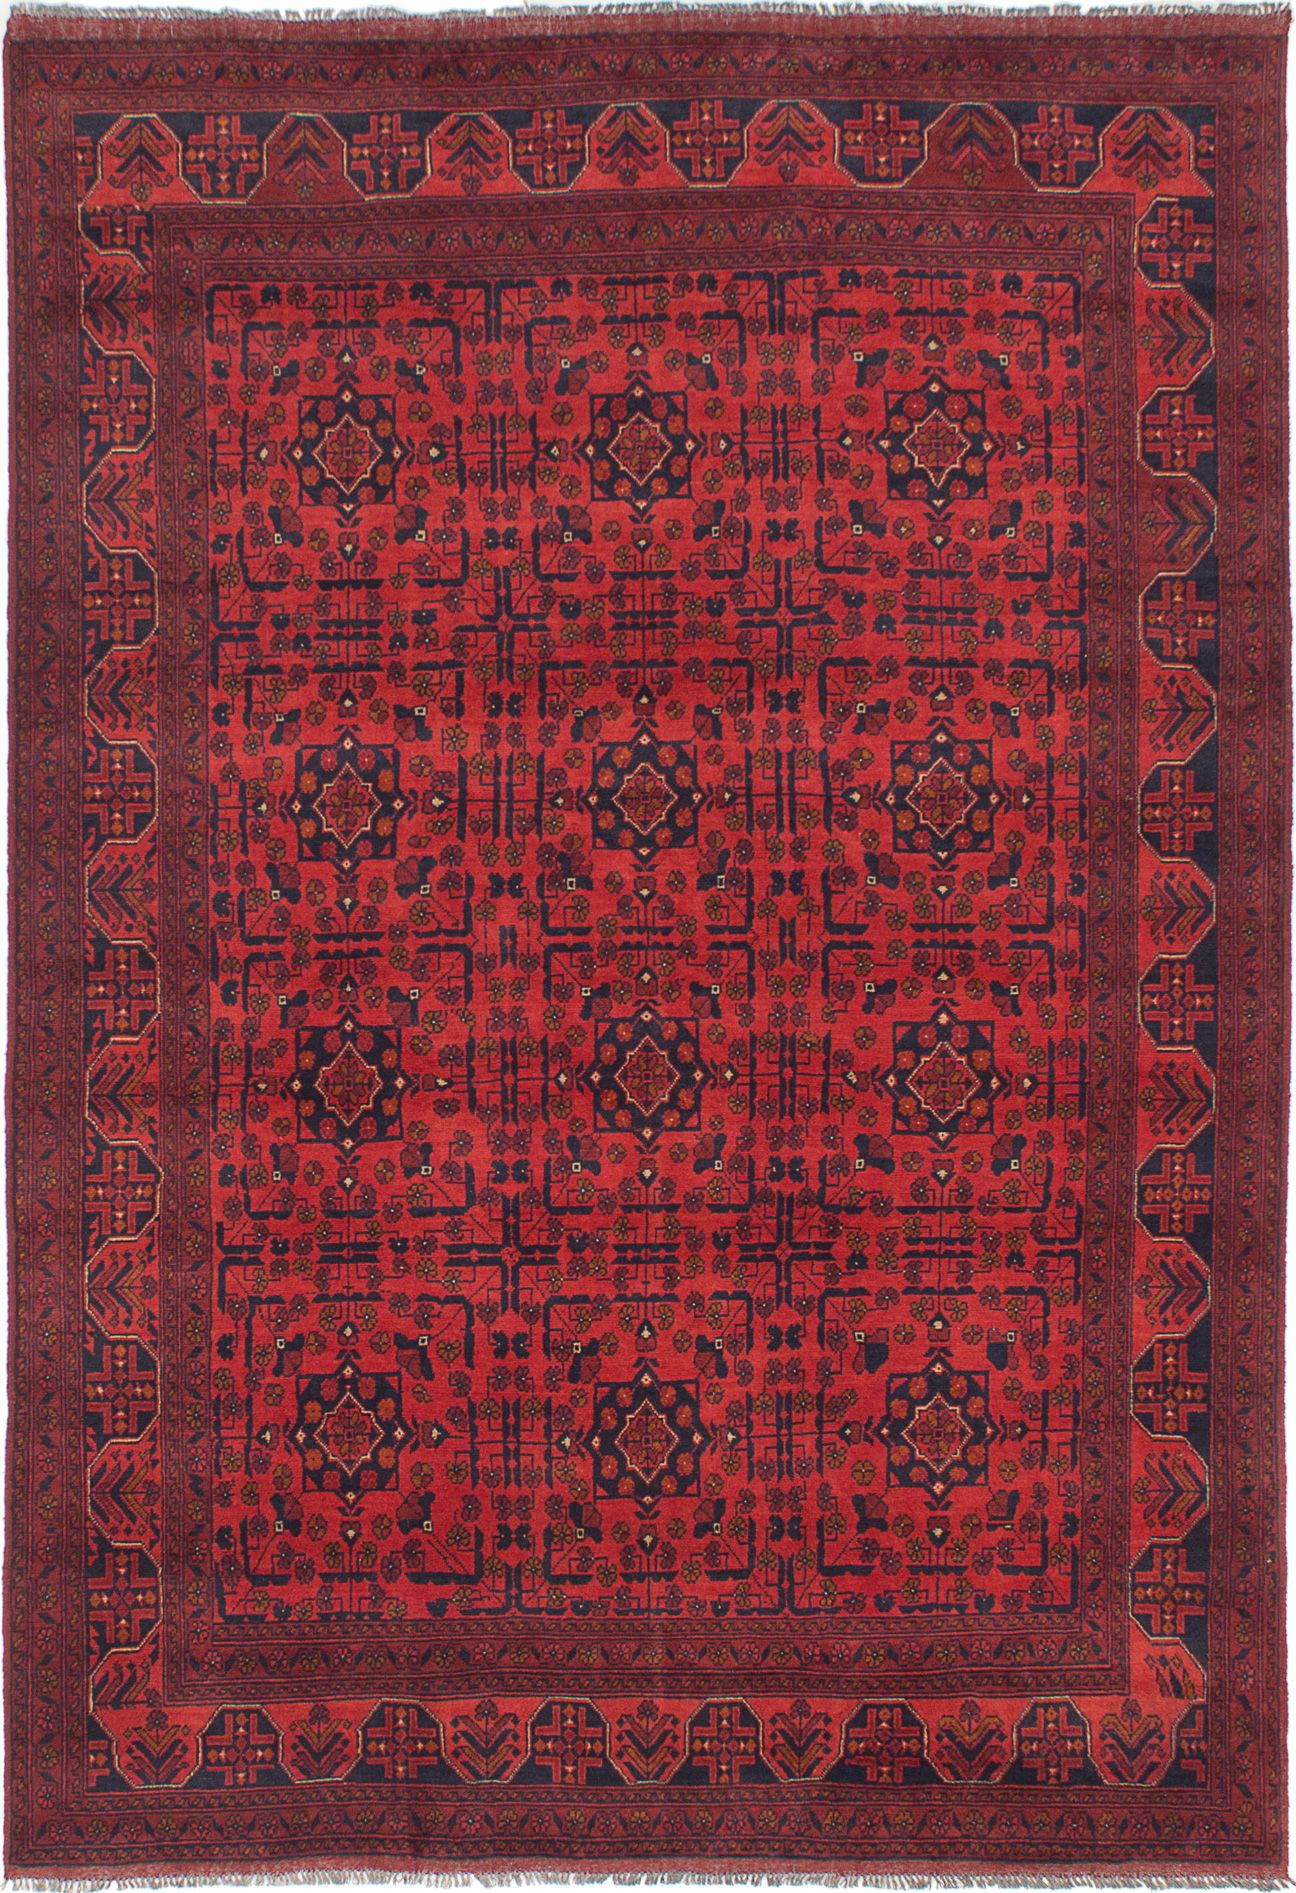 Hand-knotted Finest Khal Mohammadi Red Wool Rug 6'8" x 9'9"  Size: 6'8" x 9'9"  